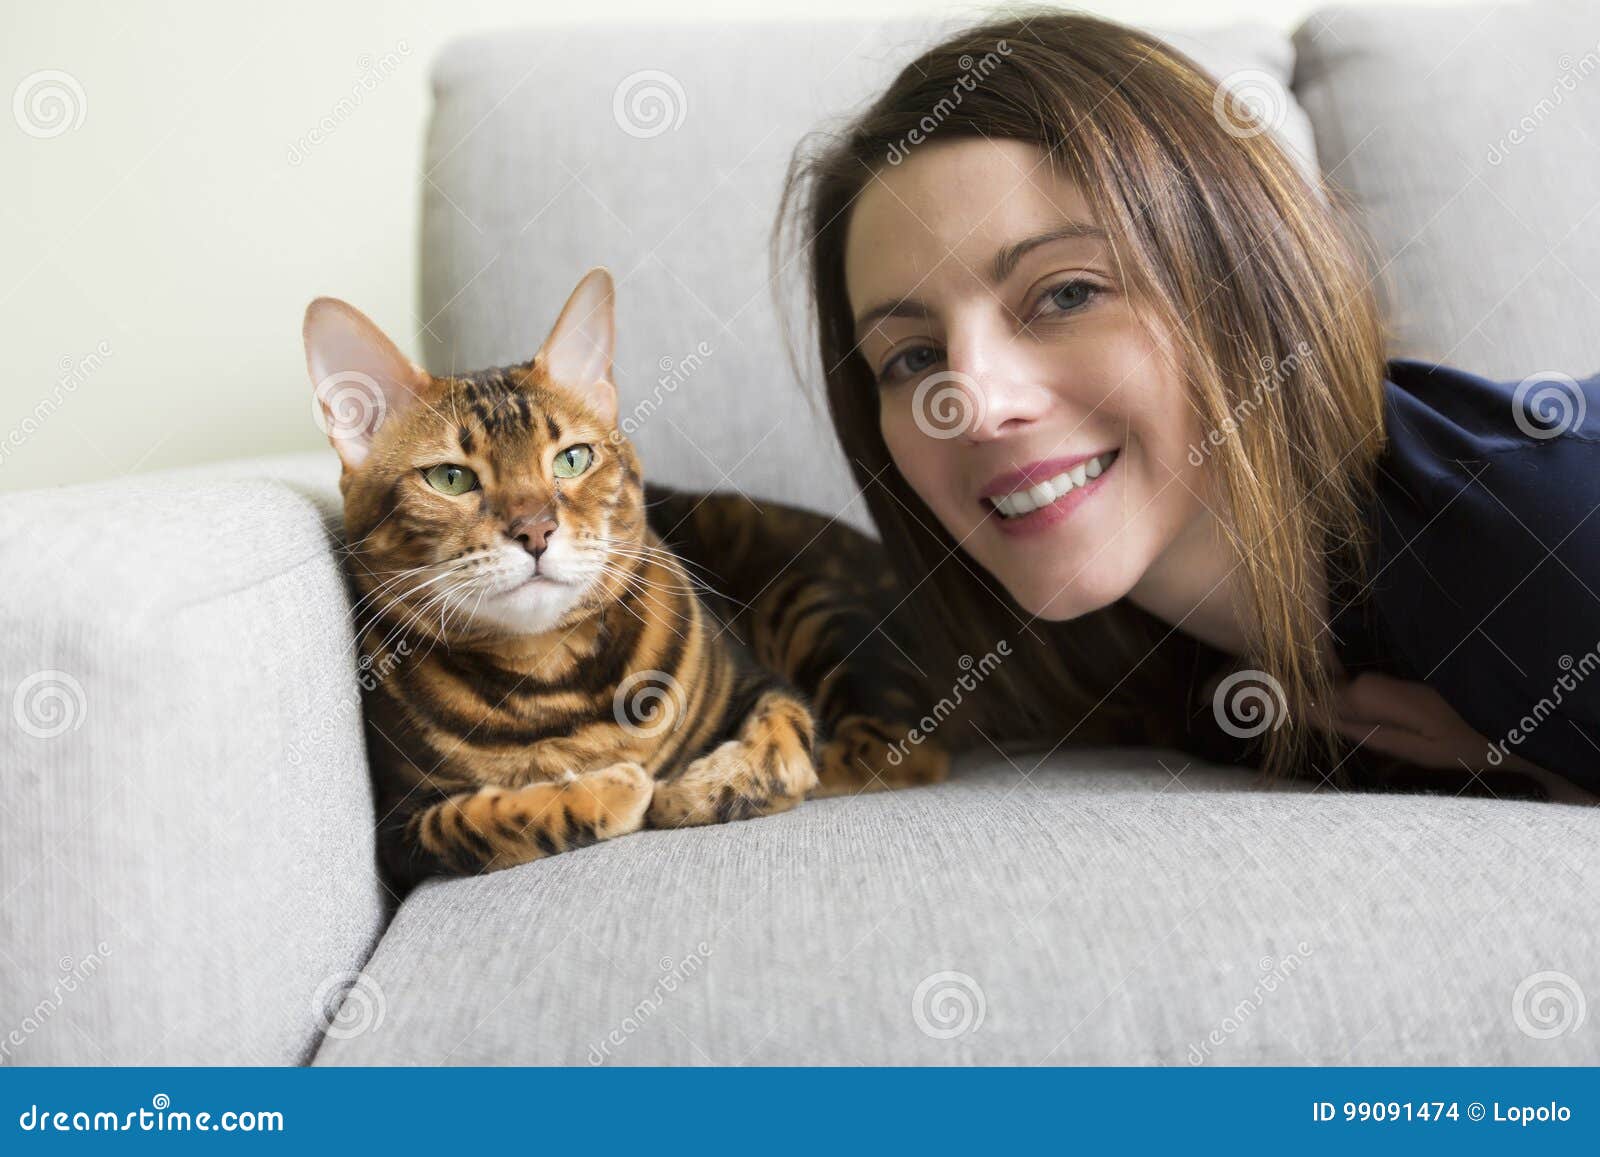 Cat and Woman in the Living Room on the Couch Stock Photo - Image of ...